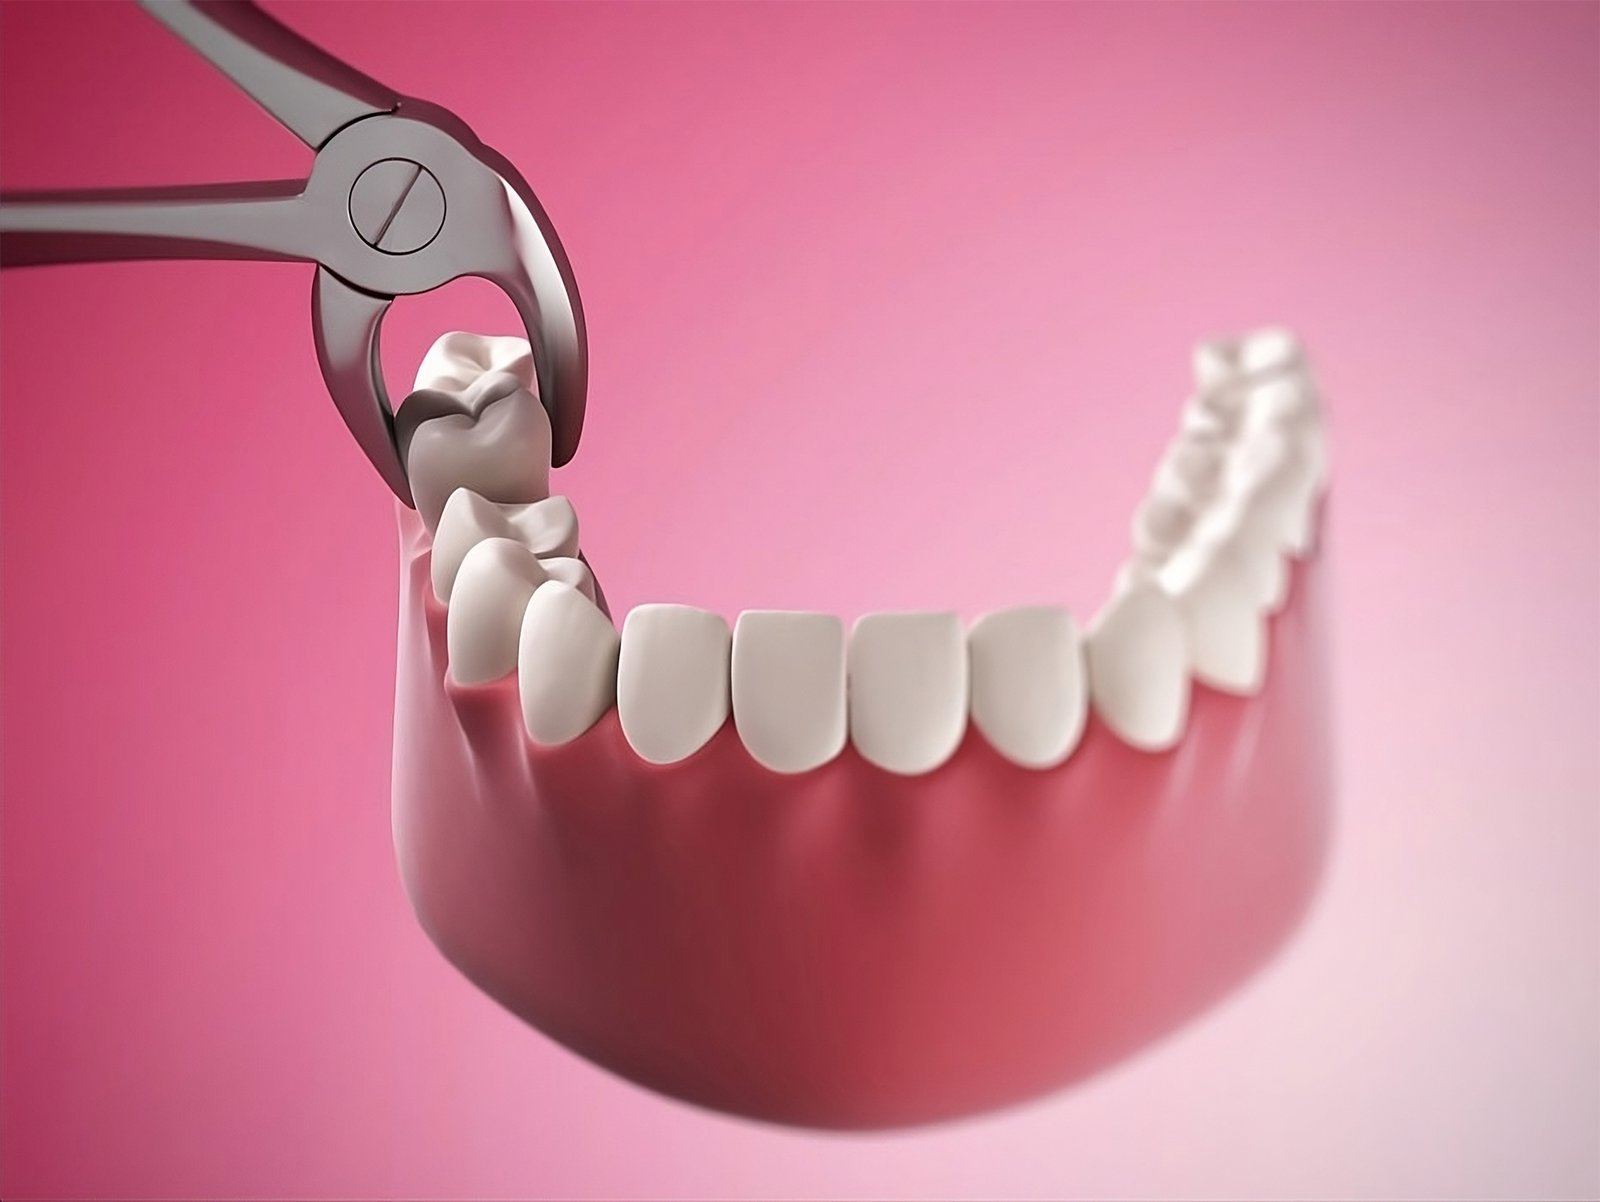 Painless Dental Extraction Surgery at Maral Dental Clinic in Scarborough